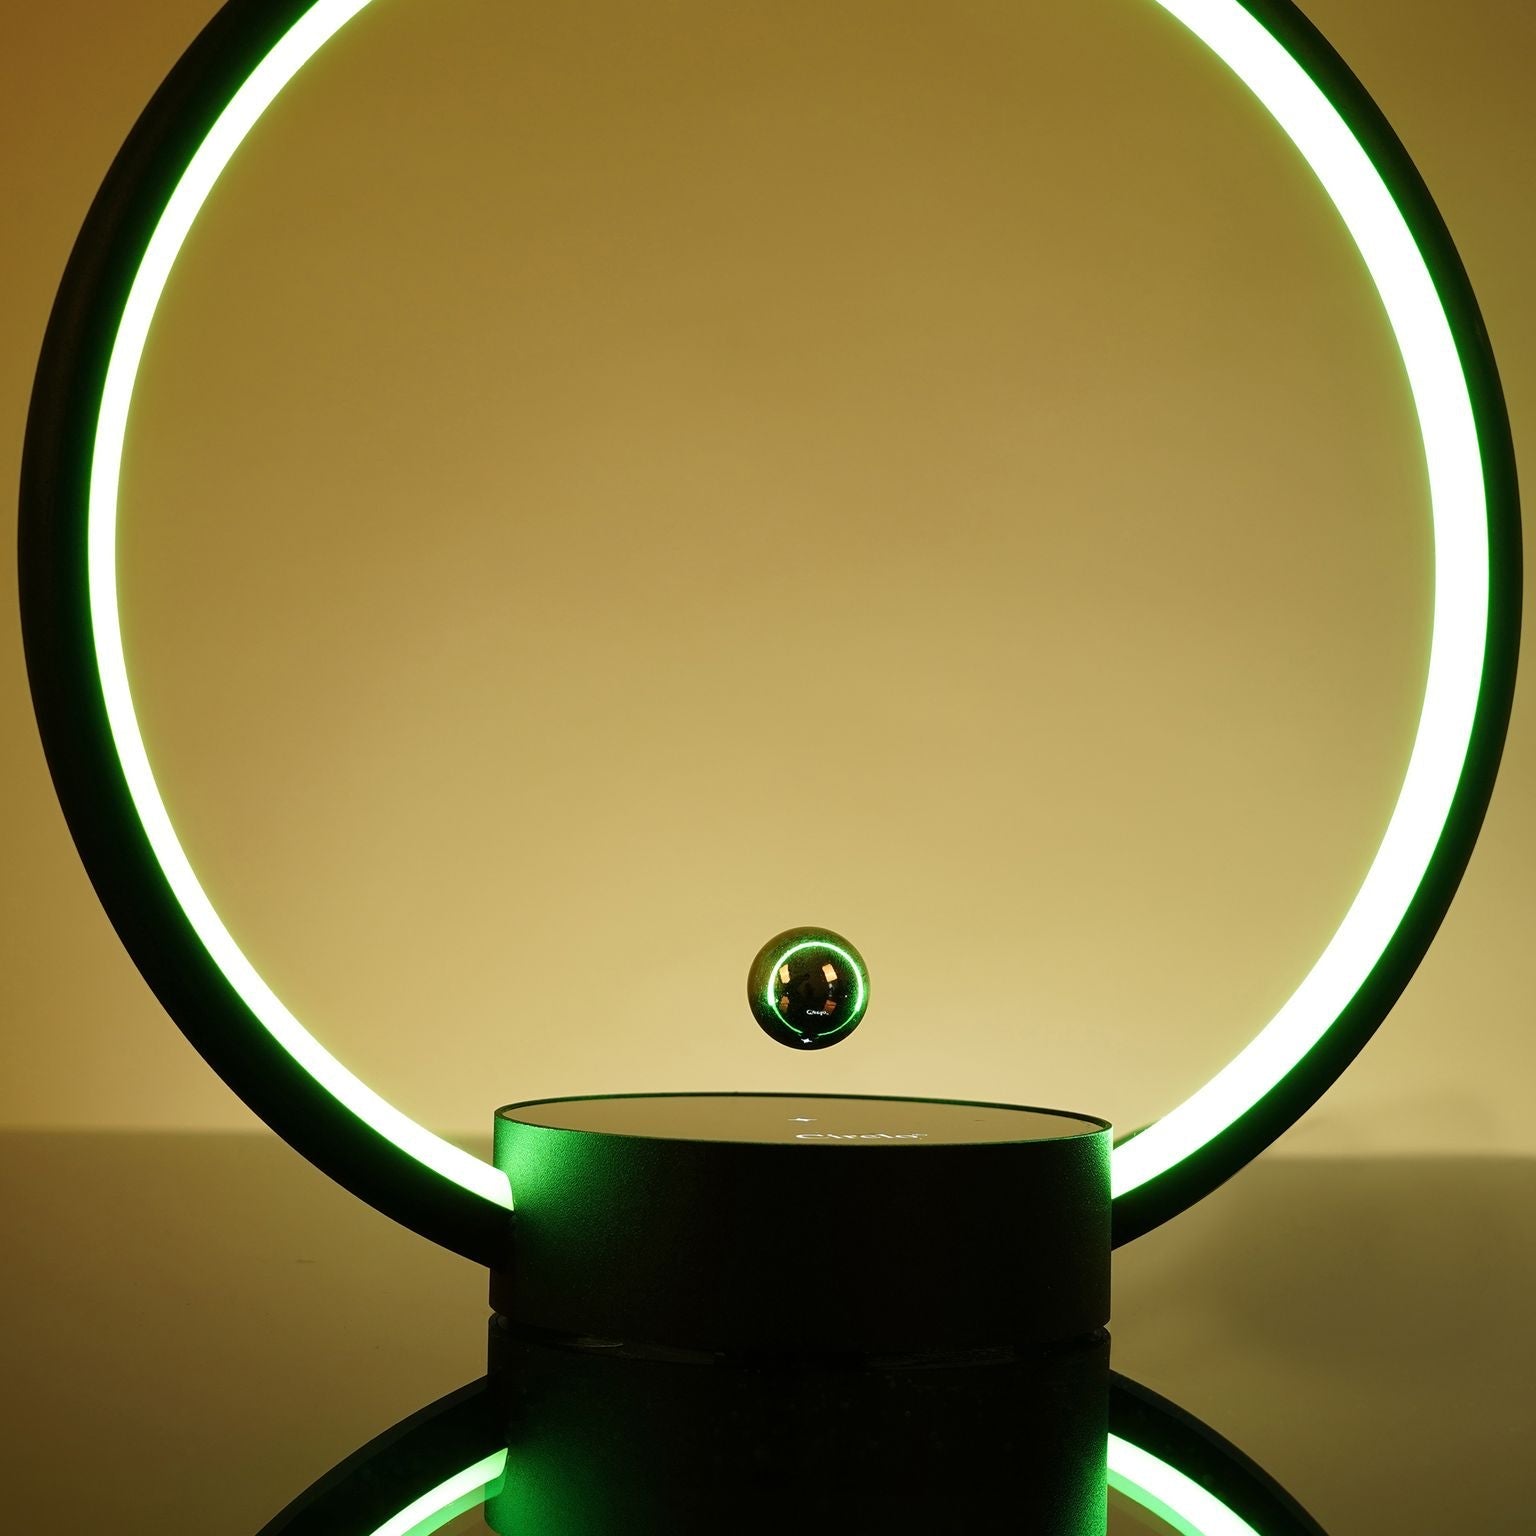 Modern Circle Table Lamp with Dimmable Touch Control, Black, Wood & Lighting LoveAdora